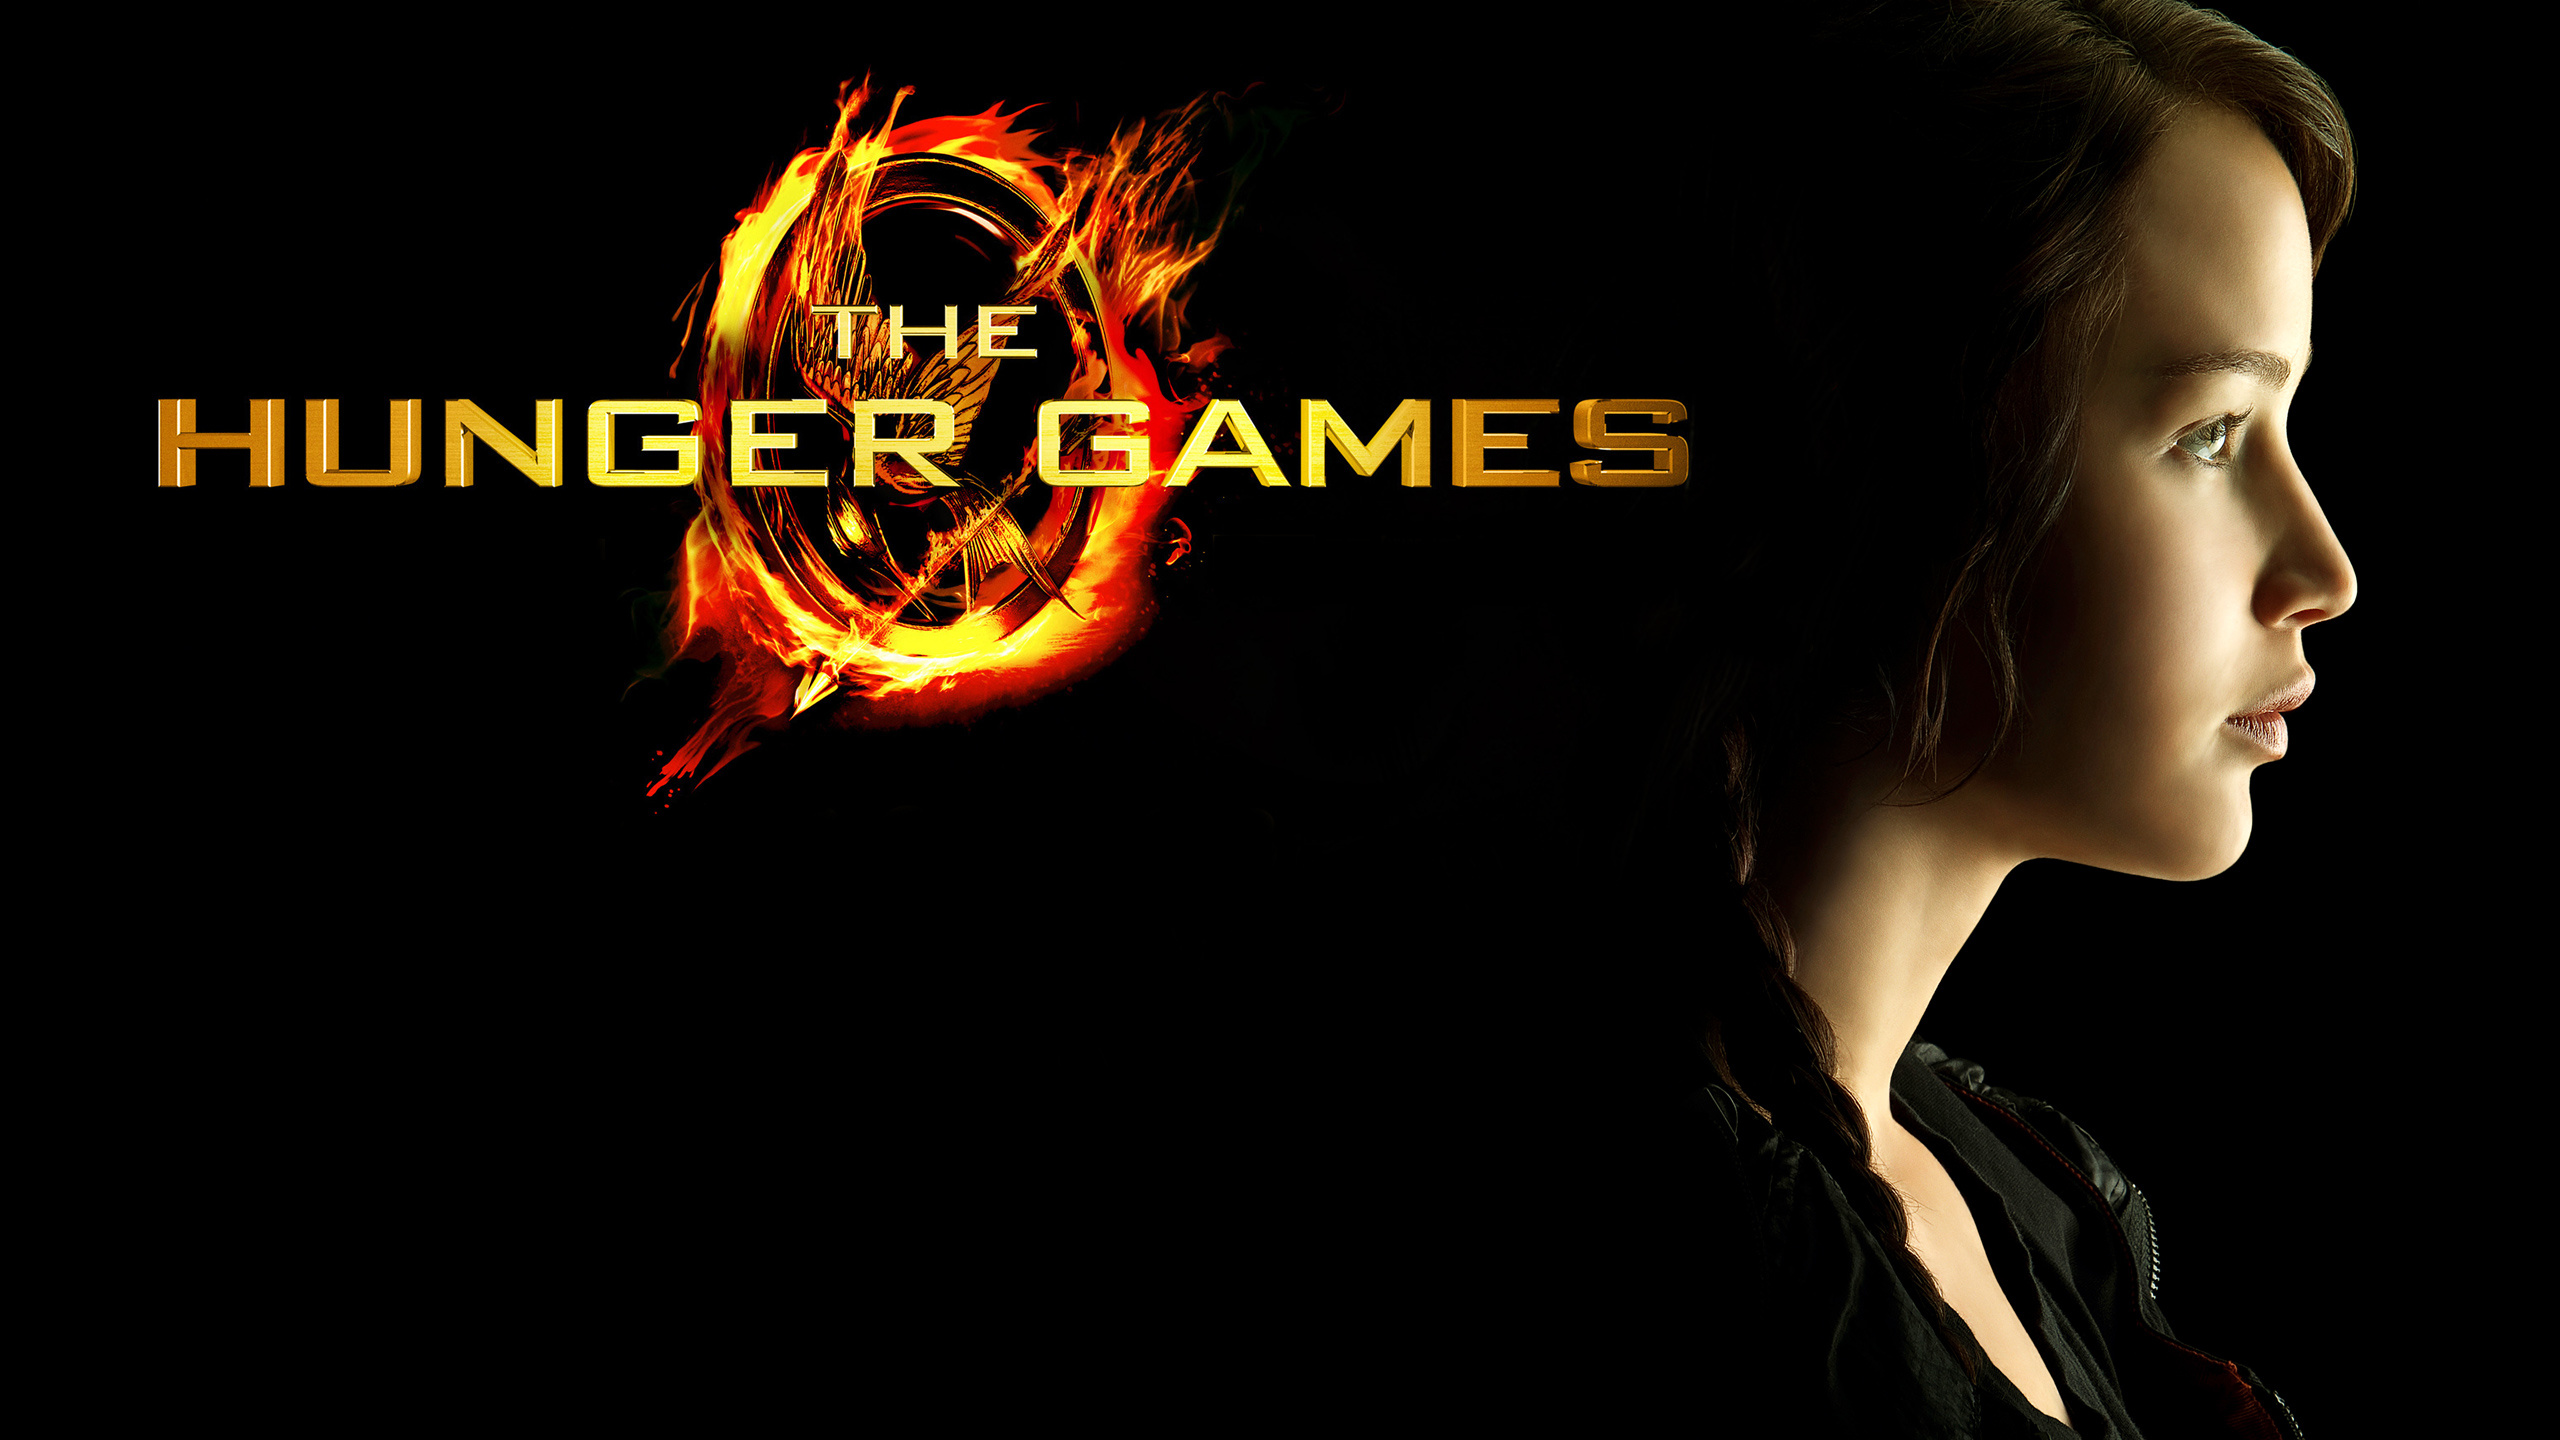 Hunger Games: Gary Ross co-wrote the screenplay with Suzanne Collins and Billy Ray. 2560x1440 HD Wallpaper.